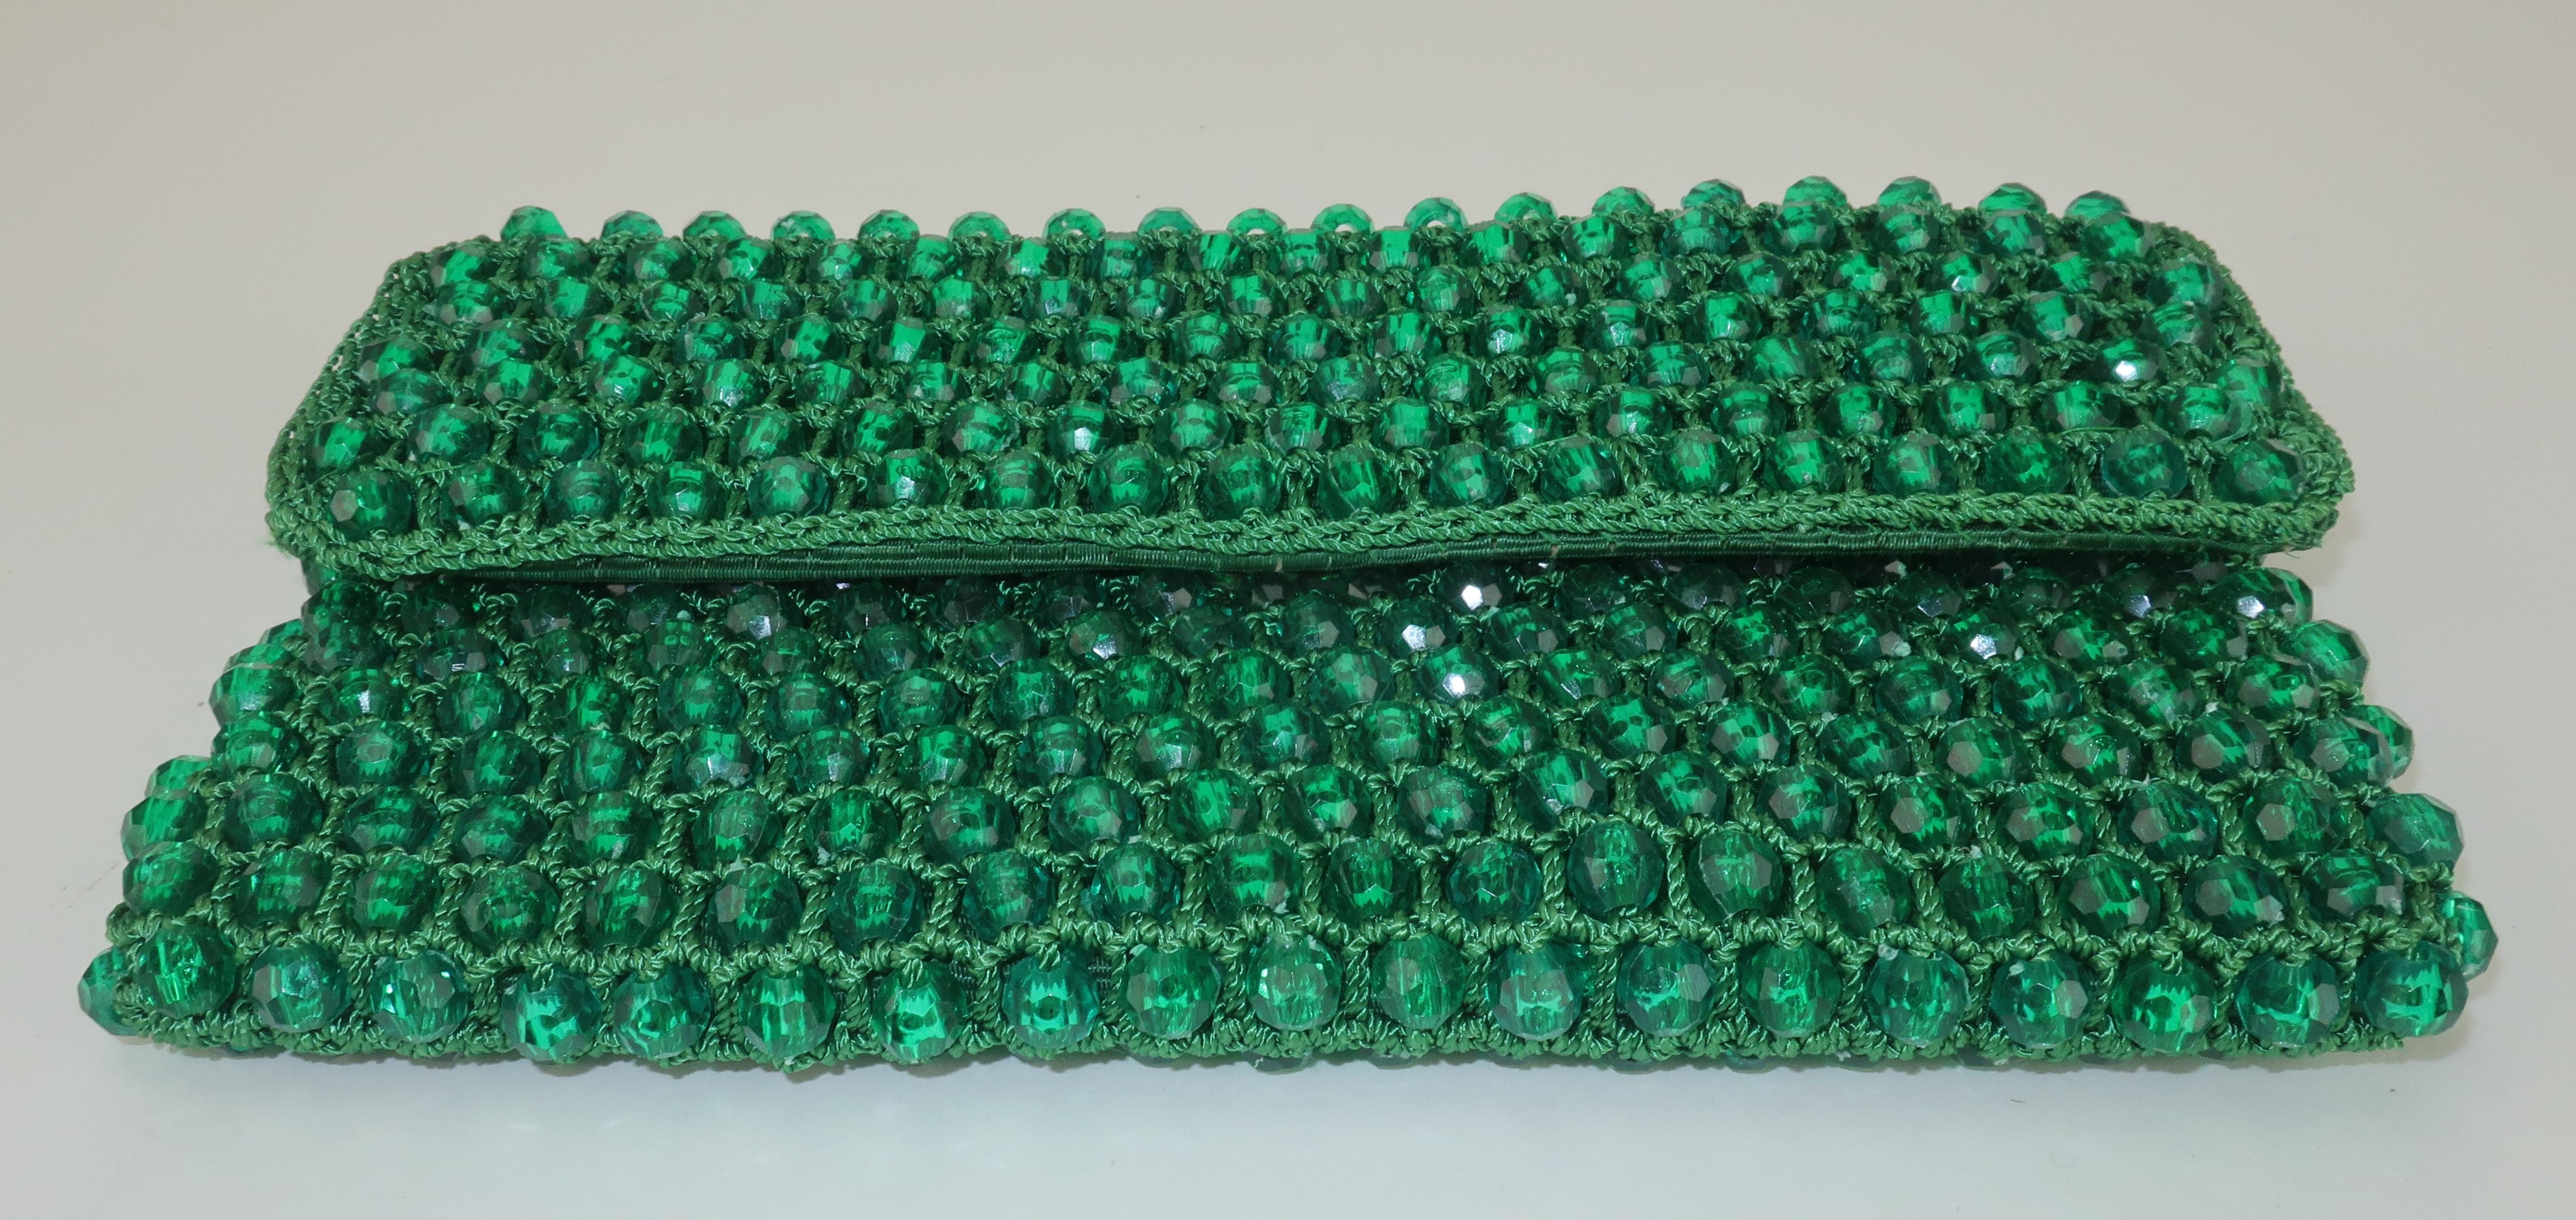 1950's Italian green beaded clutch handbag for Franklin Simon of New York.  The simple envelope silhouette is constructed of a silk crochet body embellished with faceted green translucent beading.  The snap closure opens to reveal a silk faille